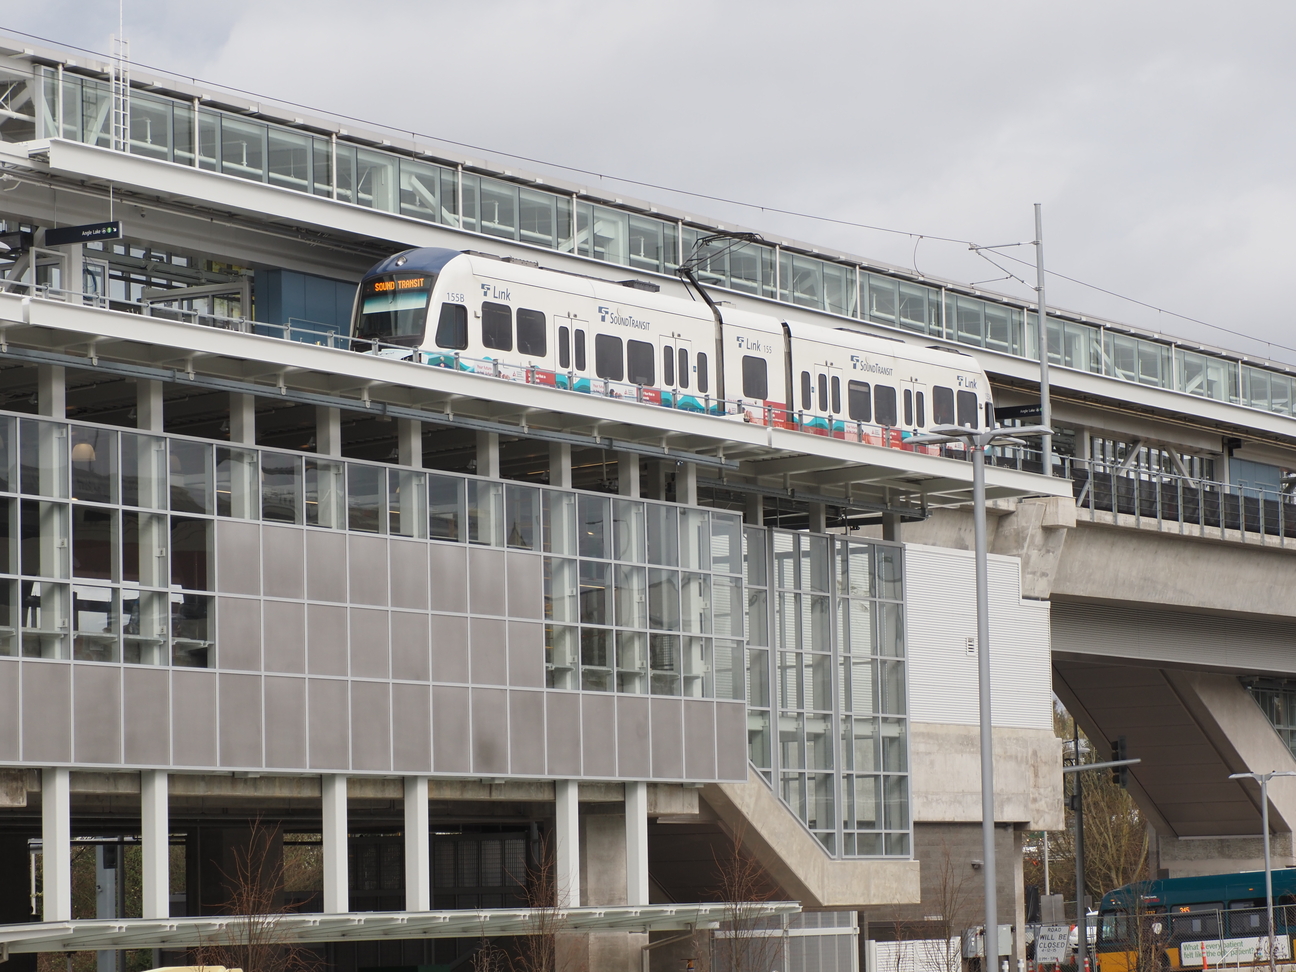 A test train at the new Northgate Link light rail station